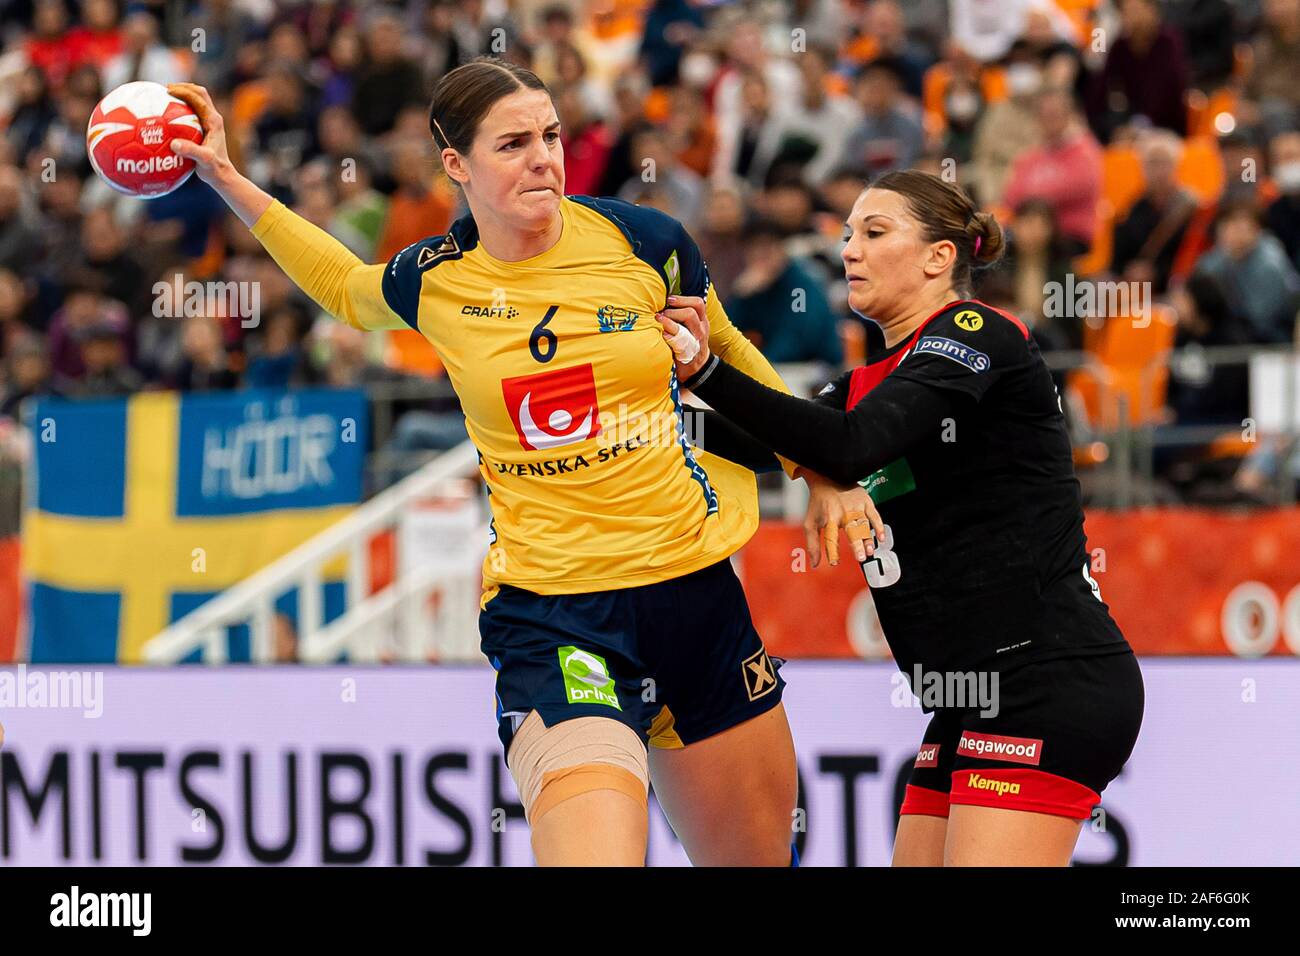 Kumamoto, Japan. 13th Dec, 2019. Handball, women: WM 2019, game for place 7, 9th matchday, Germany - Sweden. Carin Stromberg (Sweden) and Julia Behnke (Germany). Credit: Marco Wolf/wolf-sportfoto/dpa/Alamy Live News Stock Photo